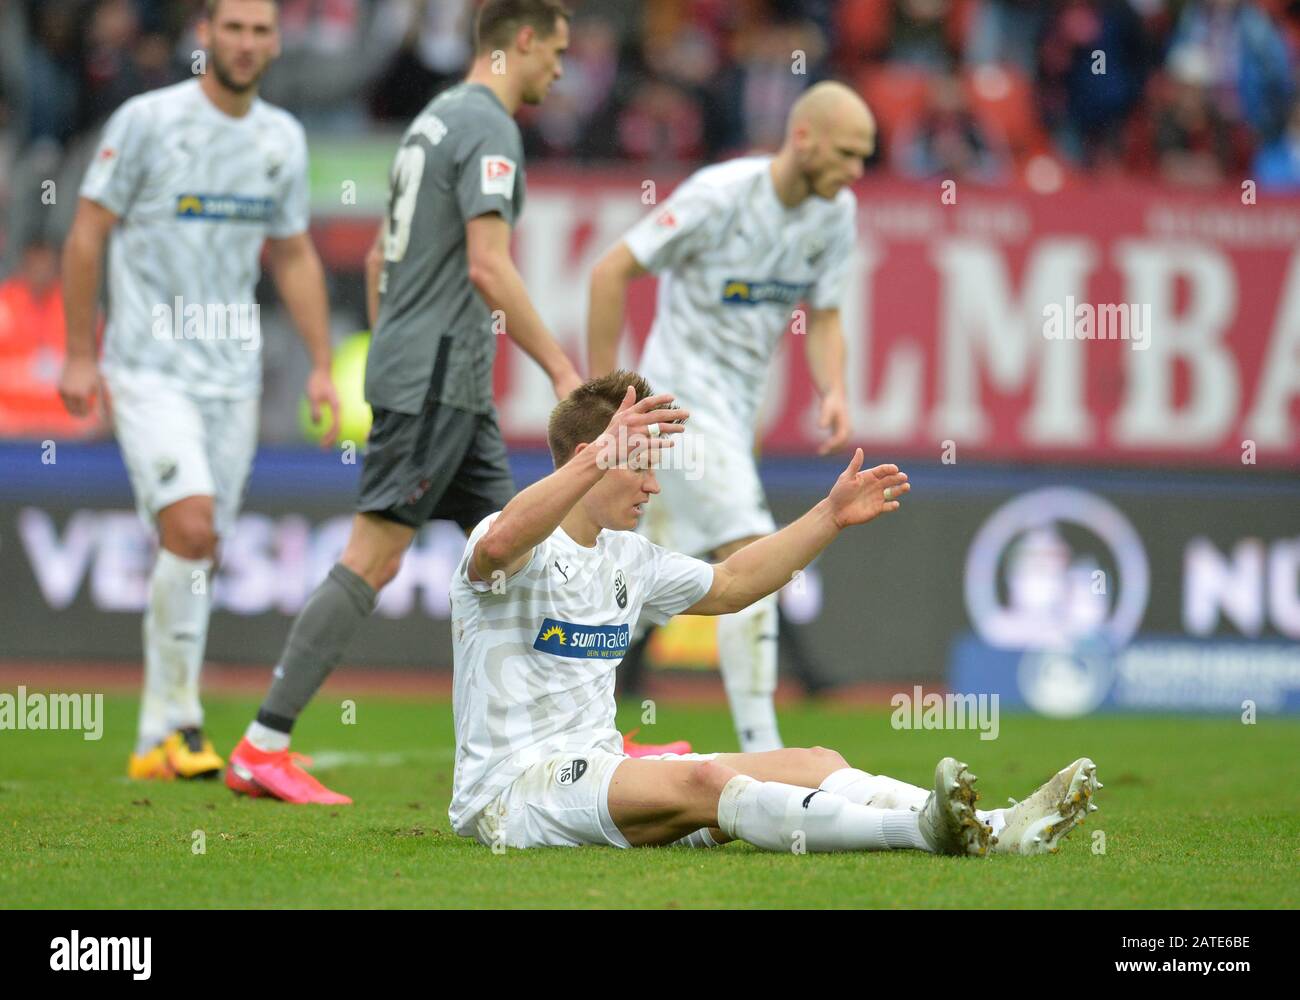 Nuremberg, Germany. 02nd Feb, 2020. Football: 2nd Bundesliga, 1st FC Nürnberg - SV Sandhausen, 20th matchday at the Max Morlock Stadium. Kevin Behrens von Sandhausen. Credit: Timm Schamberger/dpa - IMPORTANT NOTE: In accordance with the regulations of the DFL Deutsche Fußball Liga and the DFB Deutscher Fußball-Bund, it is prohibited to exploit or have exploited in the stadium and/or from the game taken photographs in the form of sequence images and/or video-like photo series./dpa/Alamy Live News Stock Photo